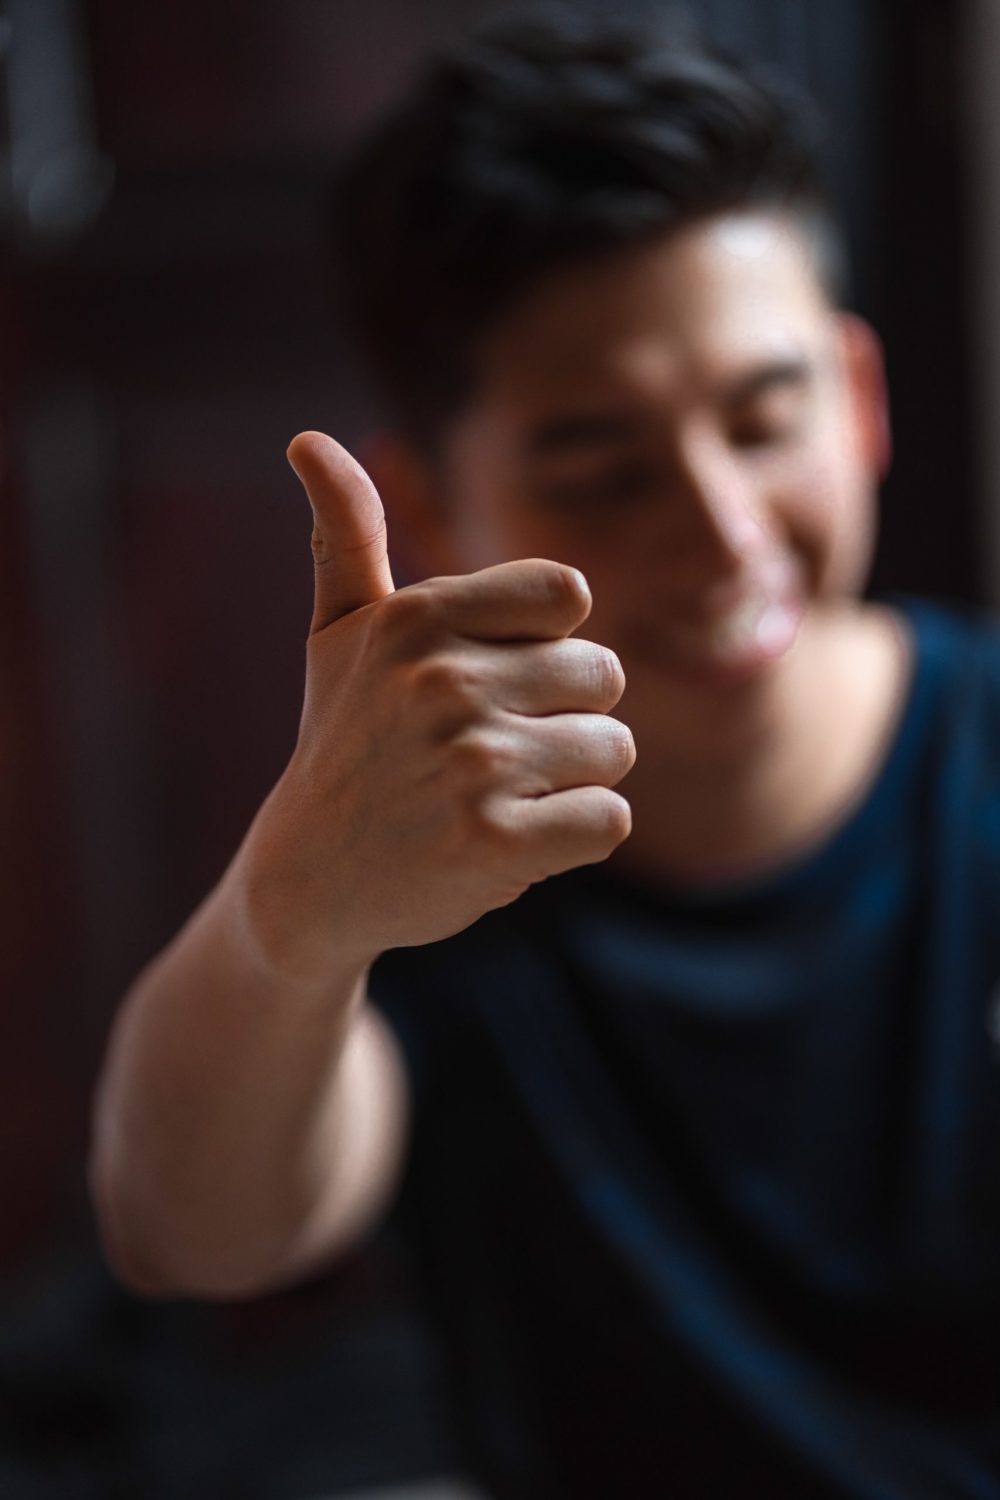 thumbs up from a man